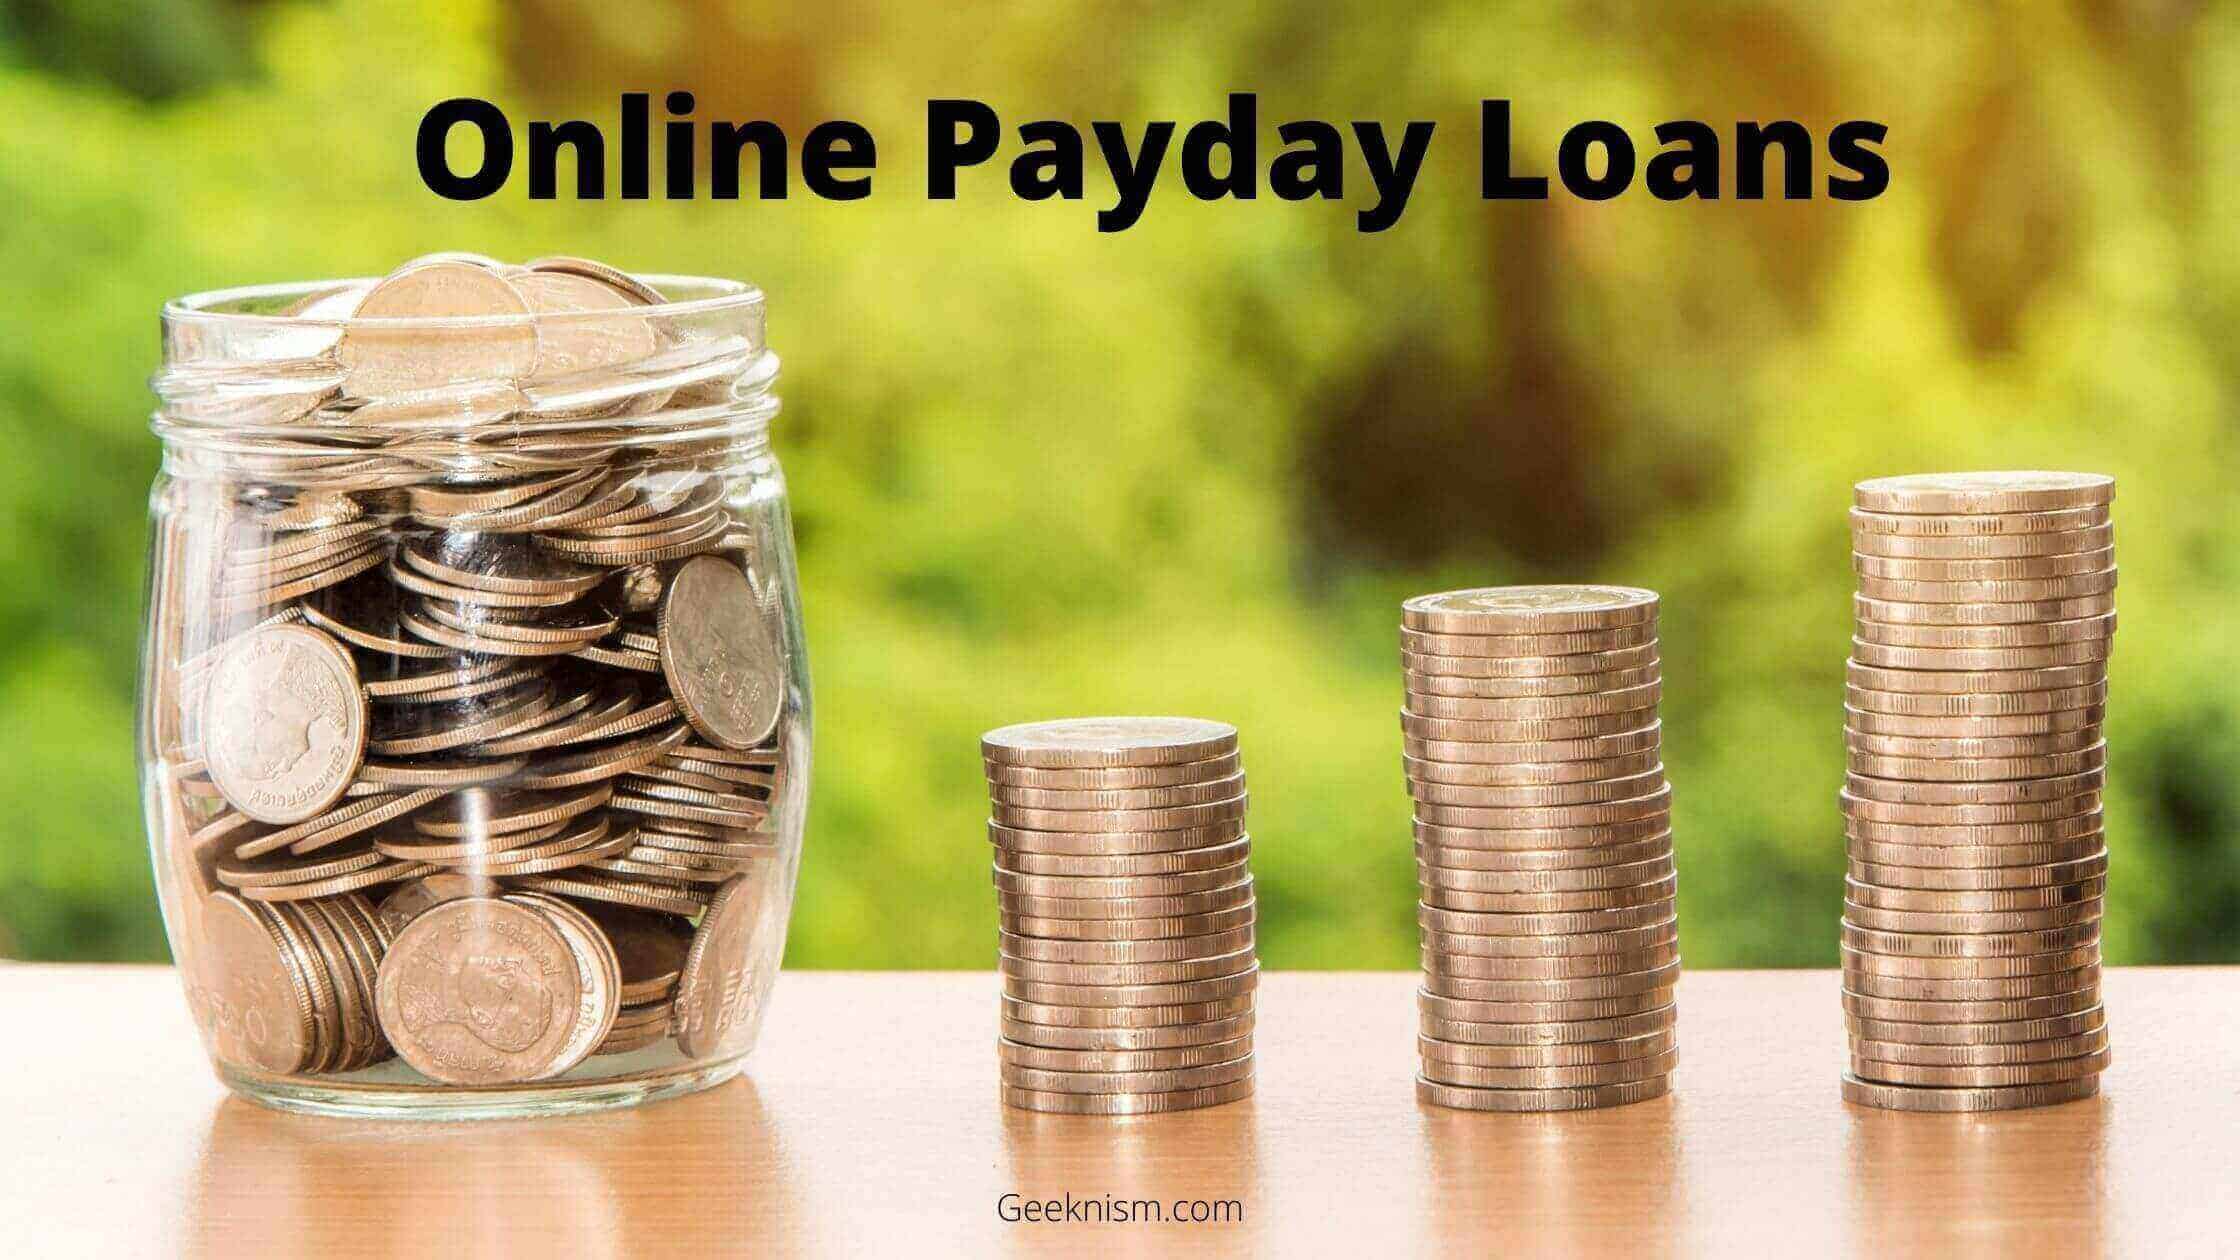 Business Growth With Online Payday Loans For Bad Credit